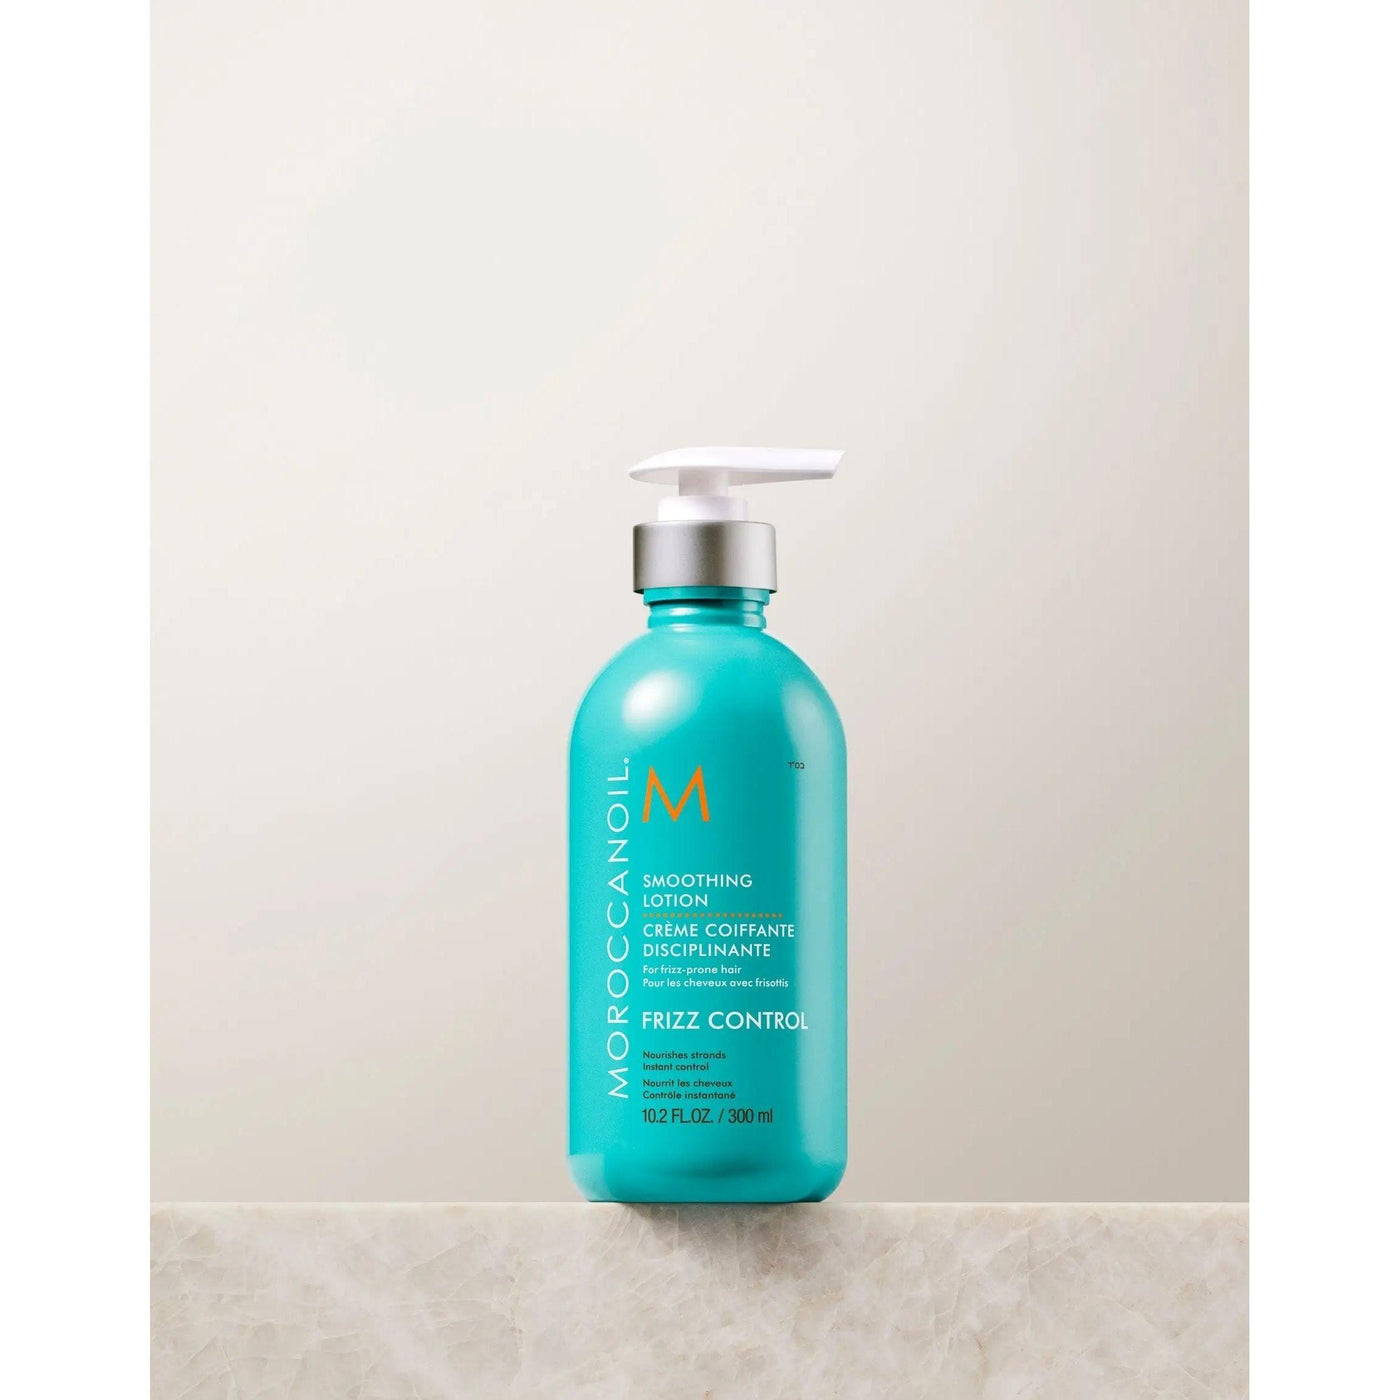 Moroccanoil Smoothing Lotion Moroccanoil Boutique Deauville